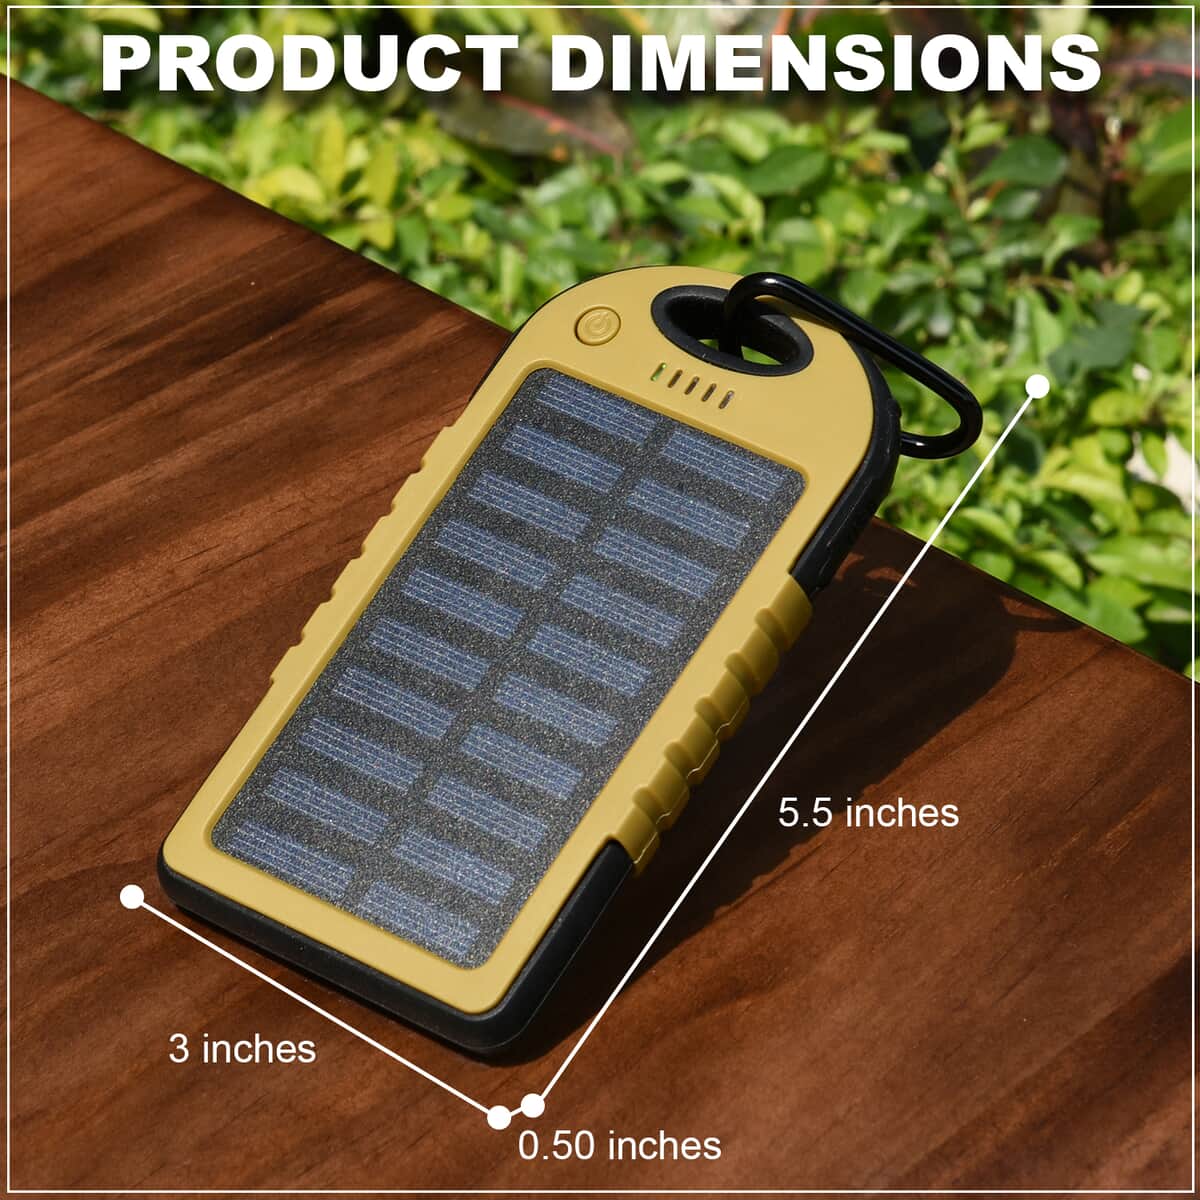 HOMESMART Golden Carabiner Solar 5000 mAh Battery Charger with USB & Emergency LED Torch image number 3